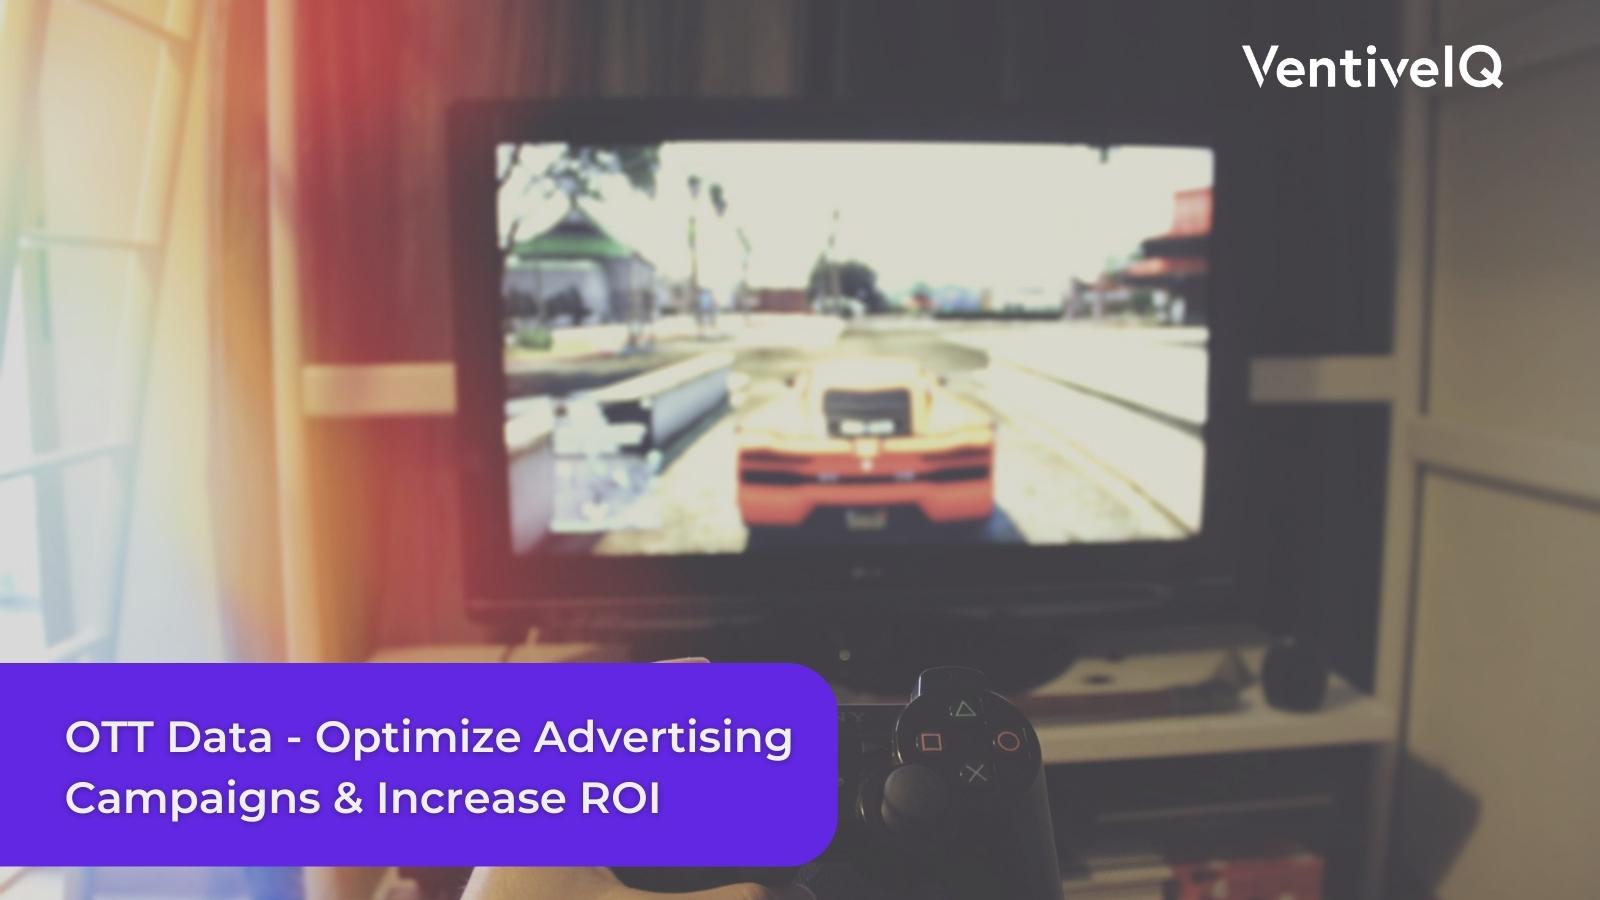 Using OTT data to optimize advertising campaigns and increase ROI